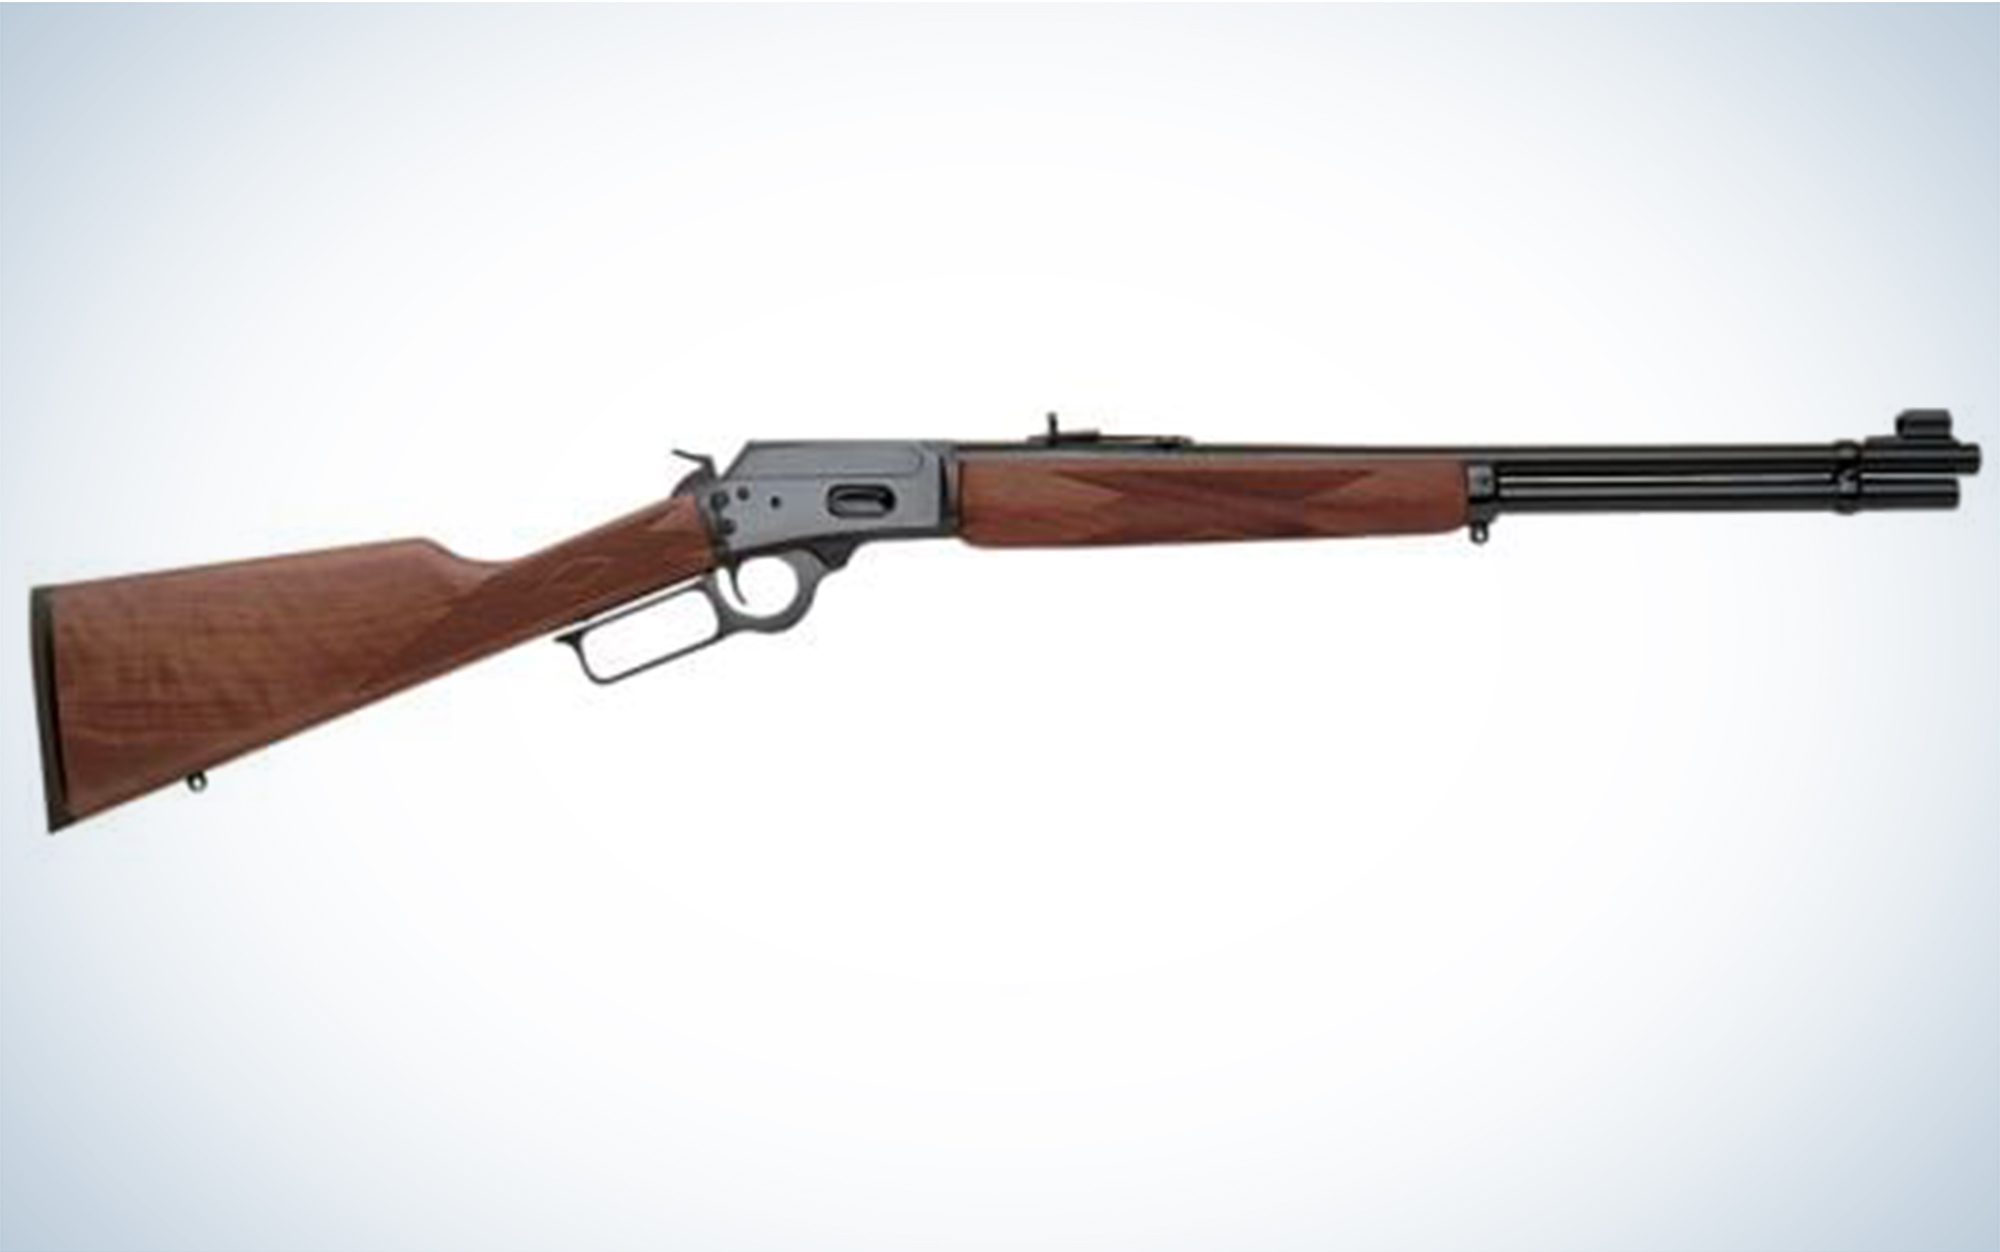 The Marlin 1894 is one of the best lever action rifles.